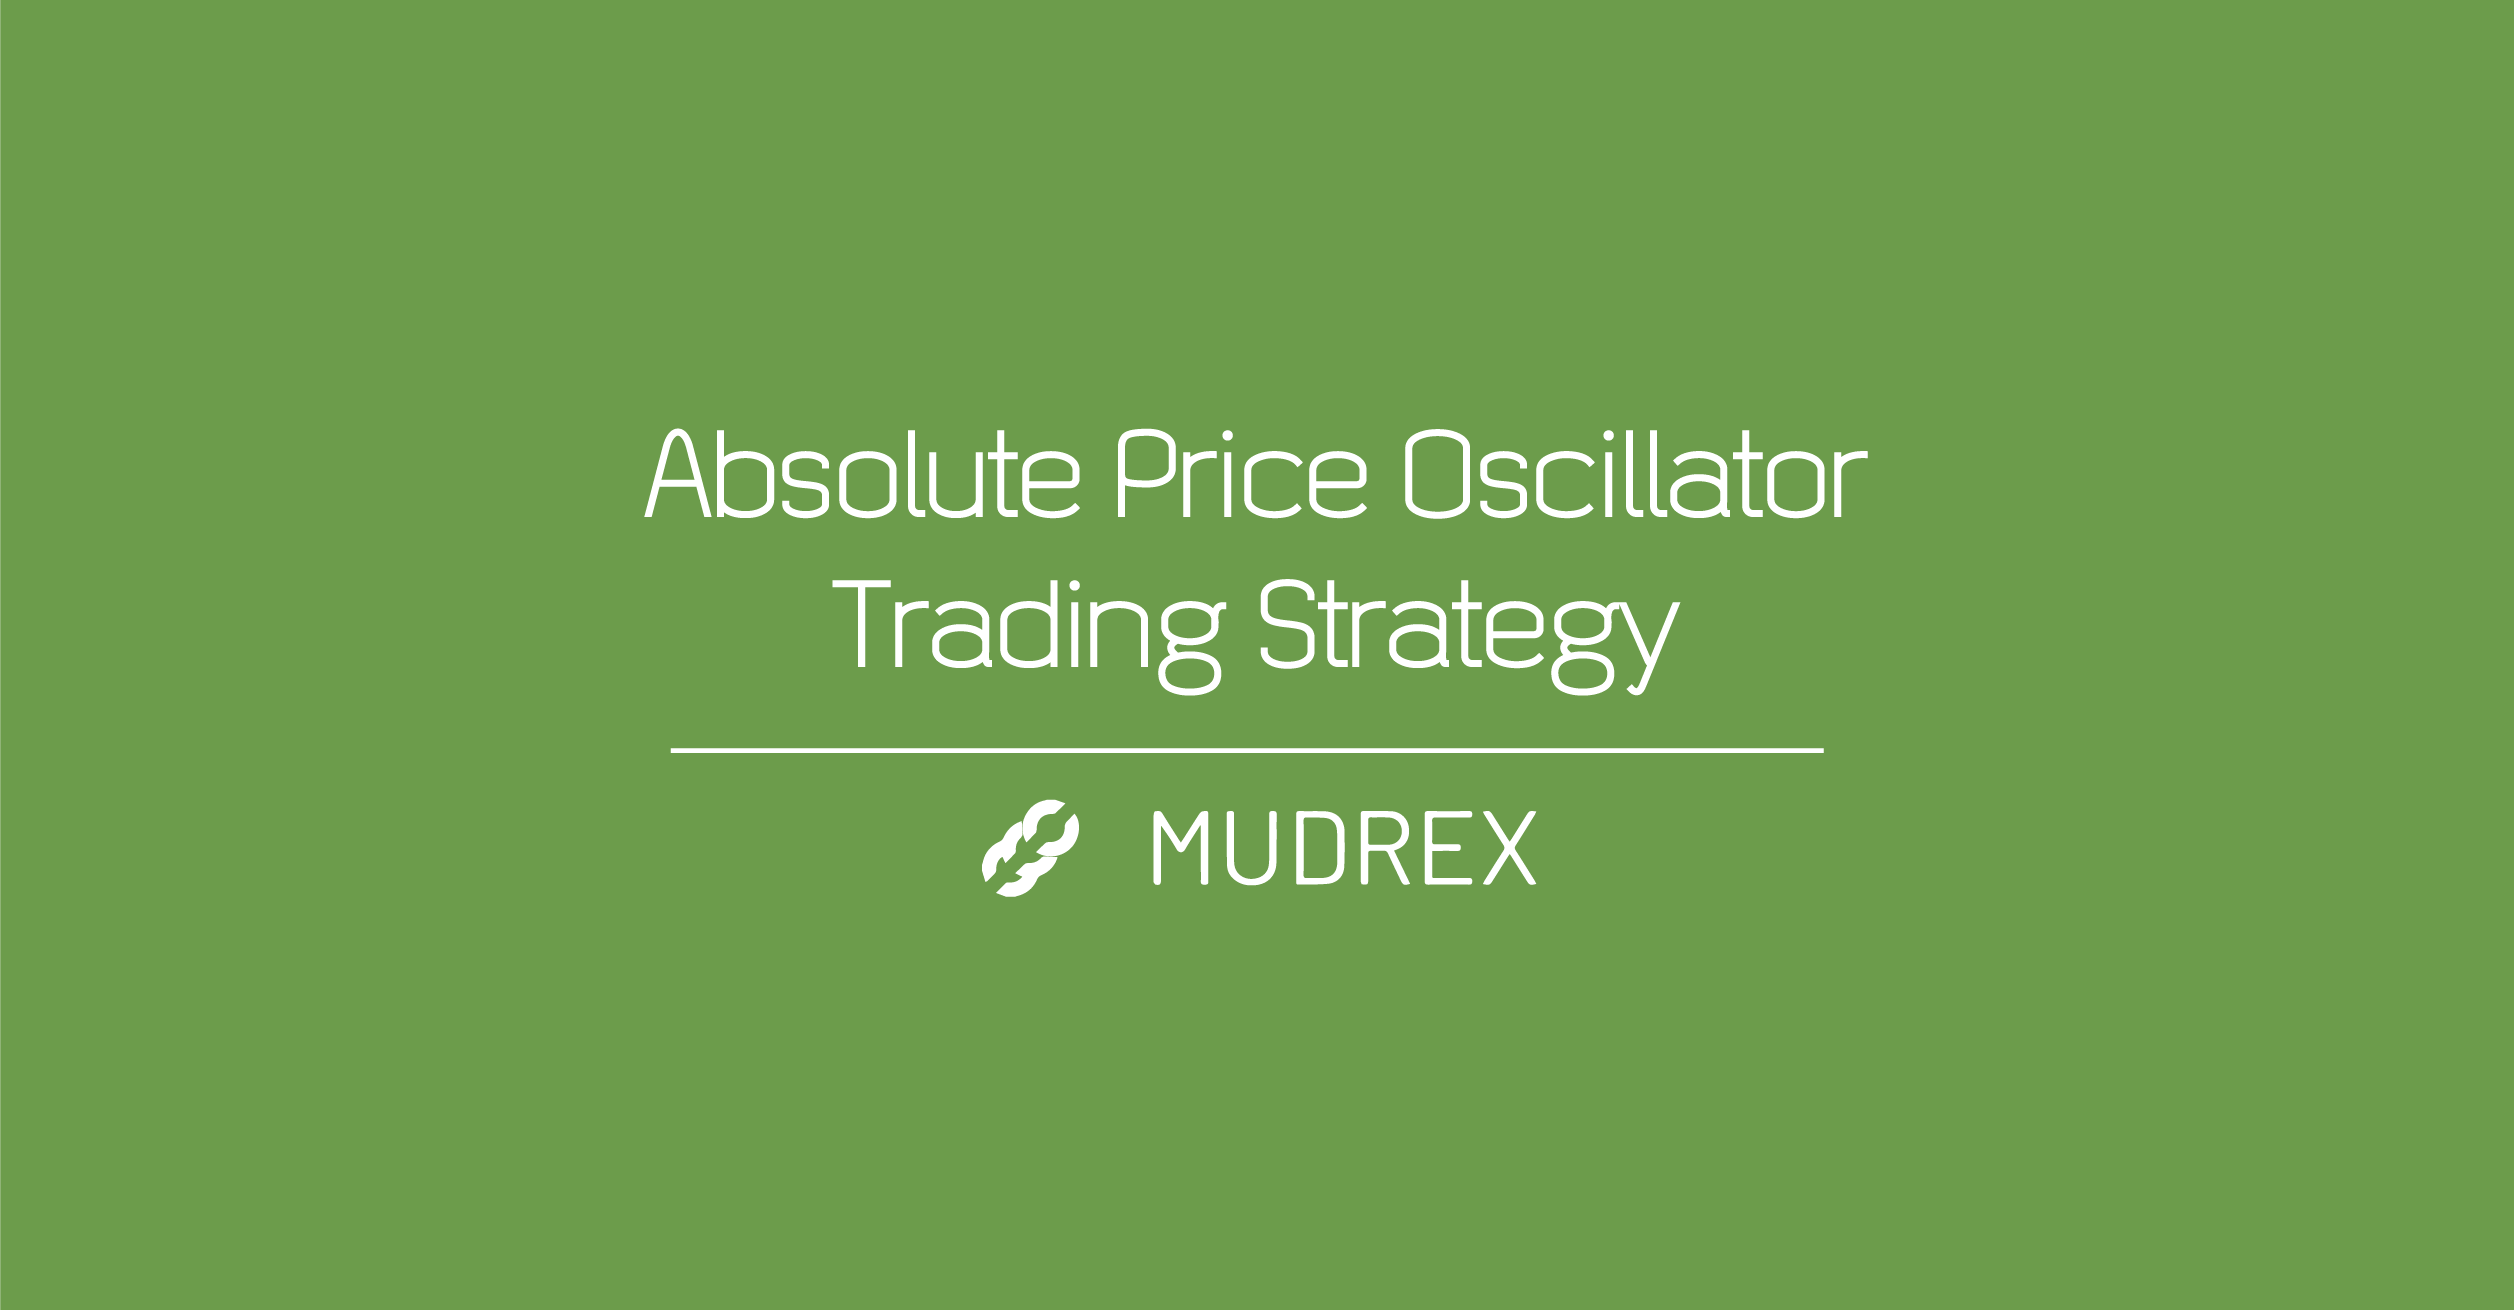 Absolute Price Oscillator Trading Strategy